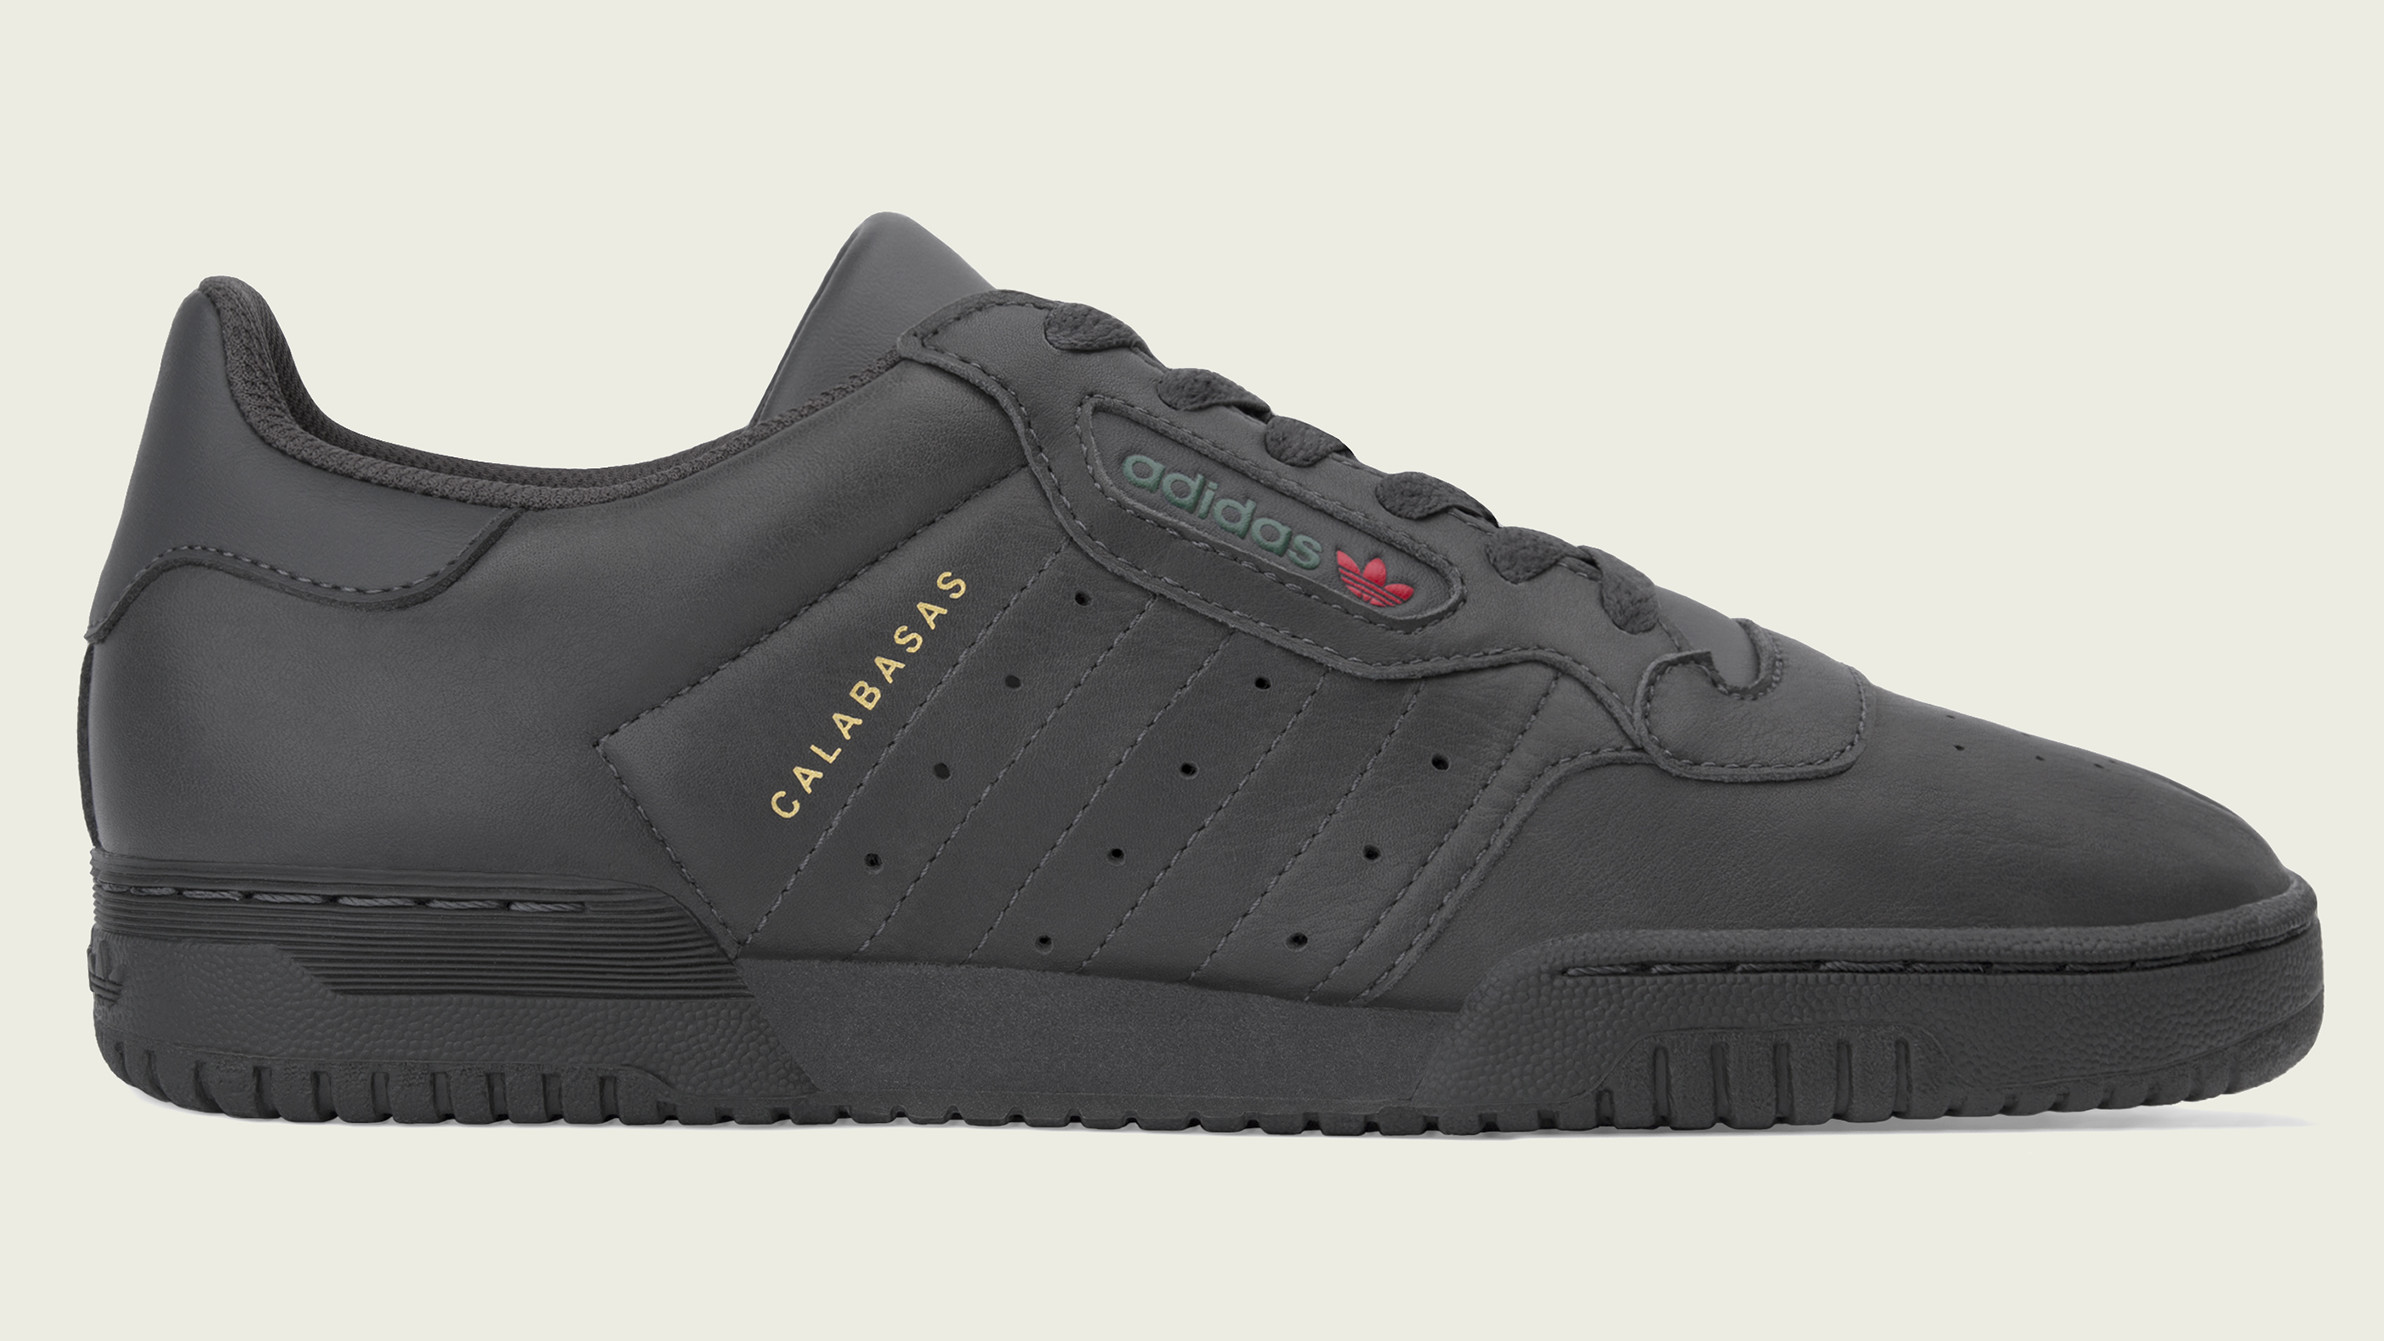 Adidas Yeezy Powerphase 'Core Black' CG6420 Release Date | Sole Collector